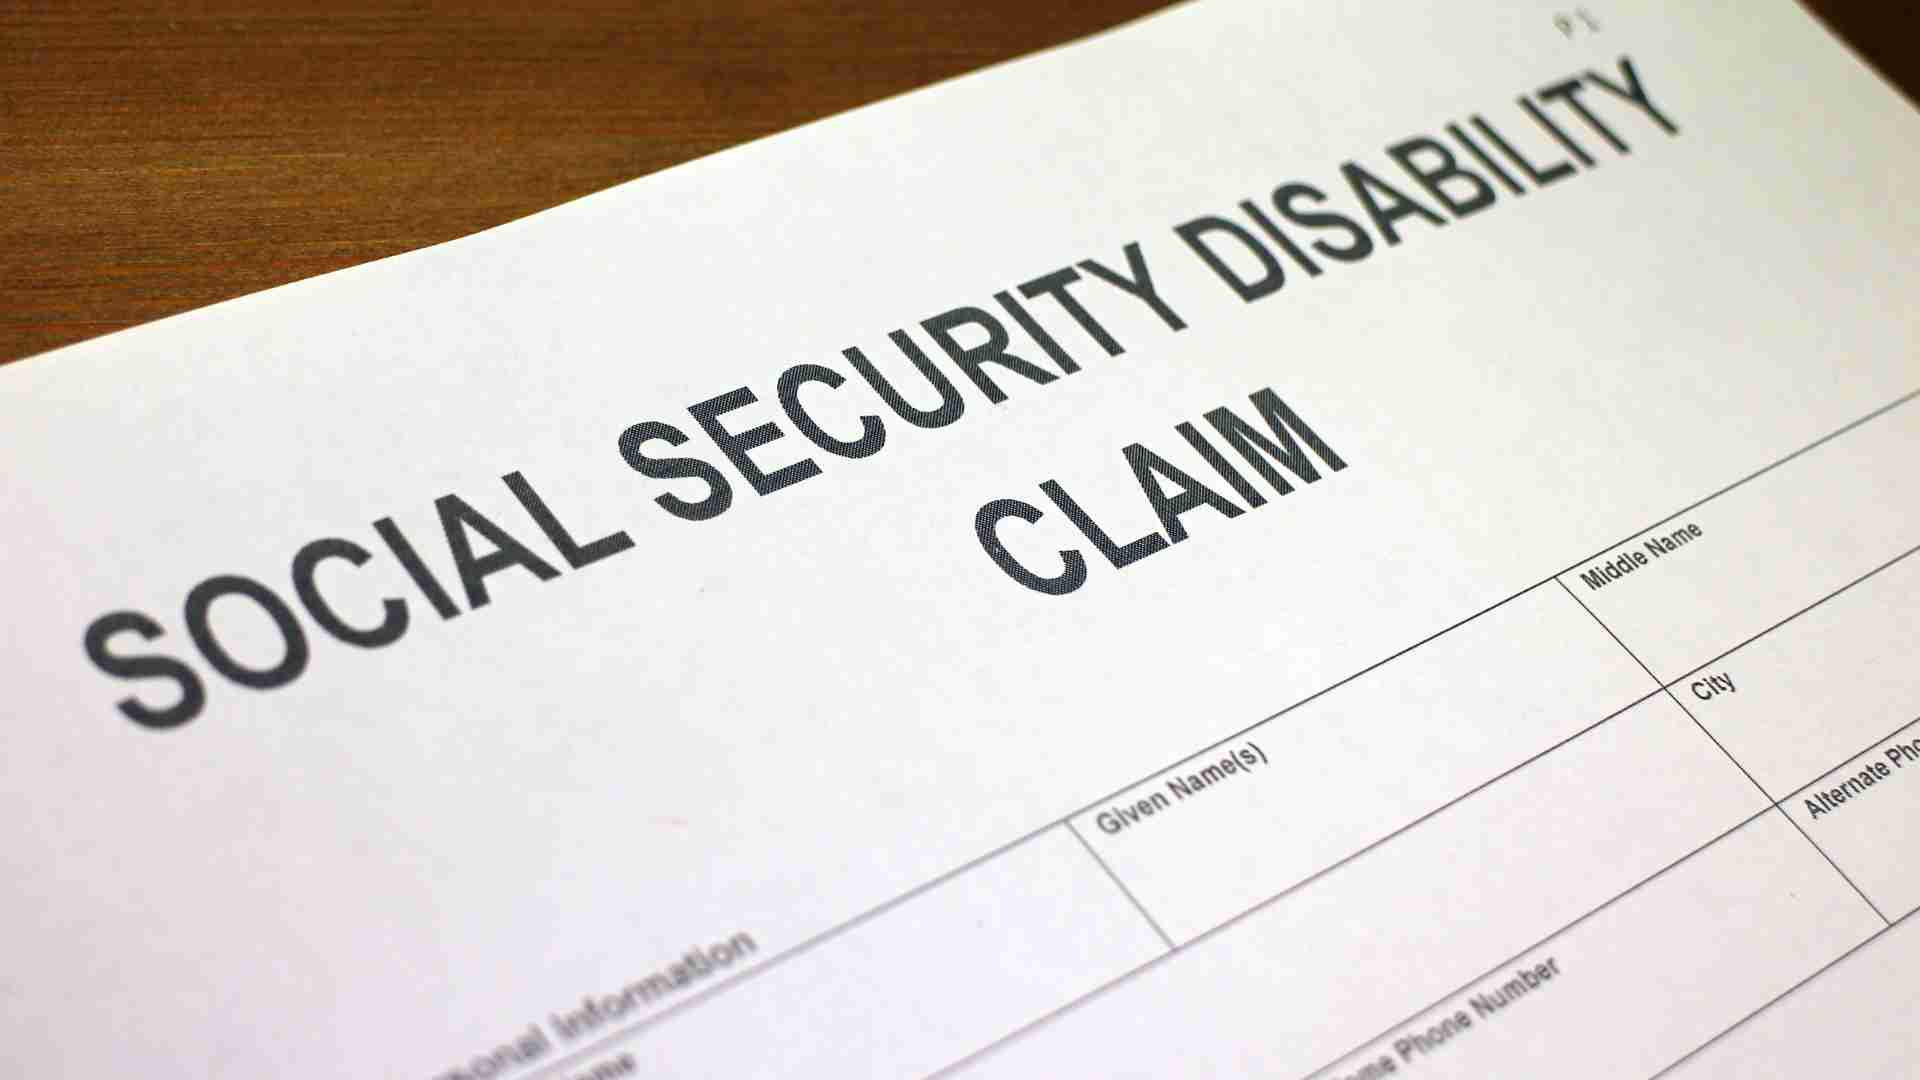 SSDI applicants must meet all the requirements that Social Security has set for disability benefits